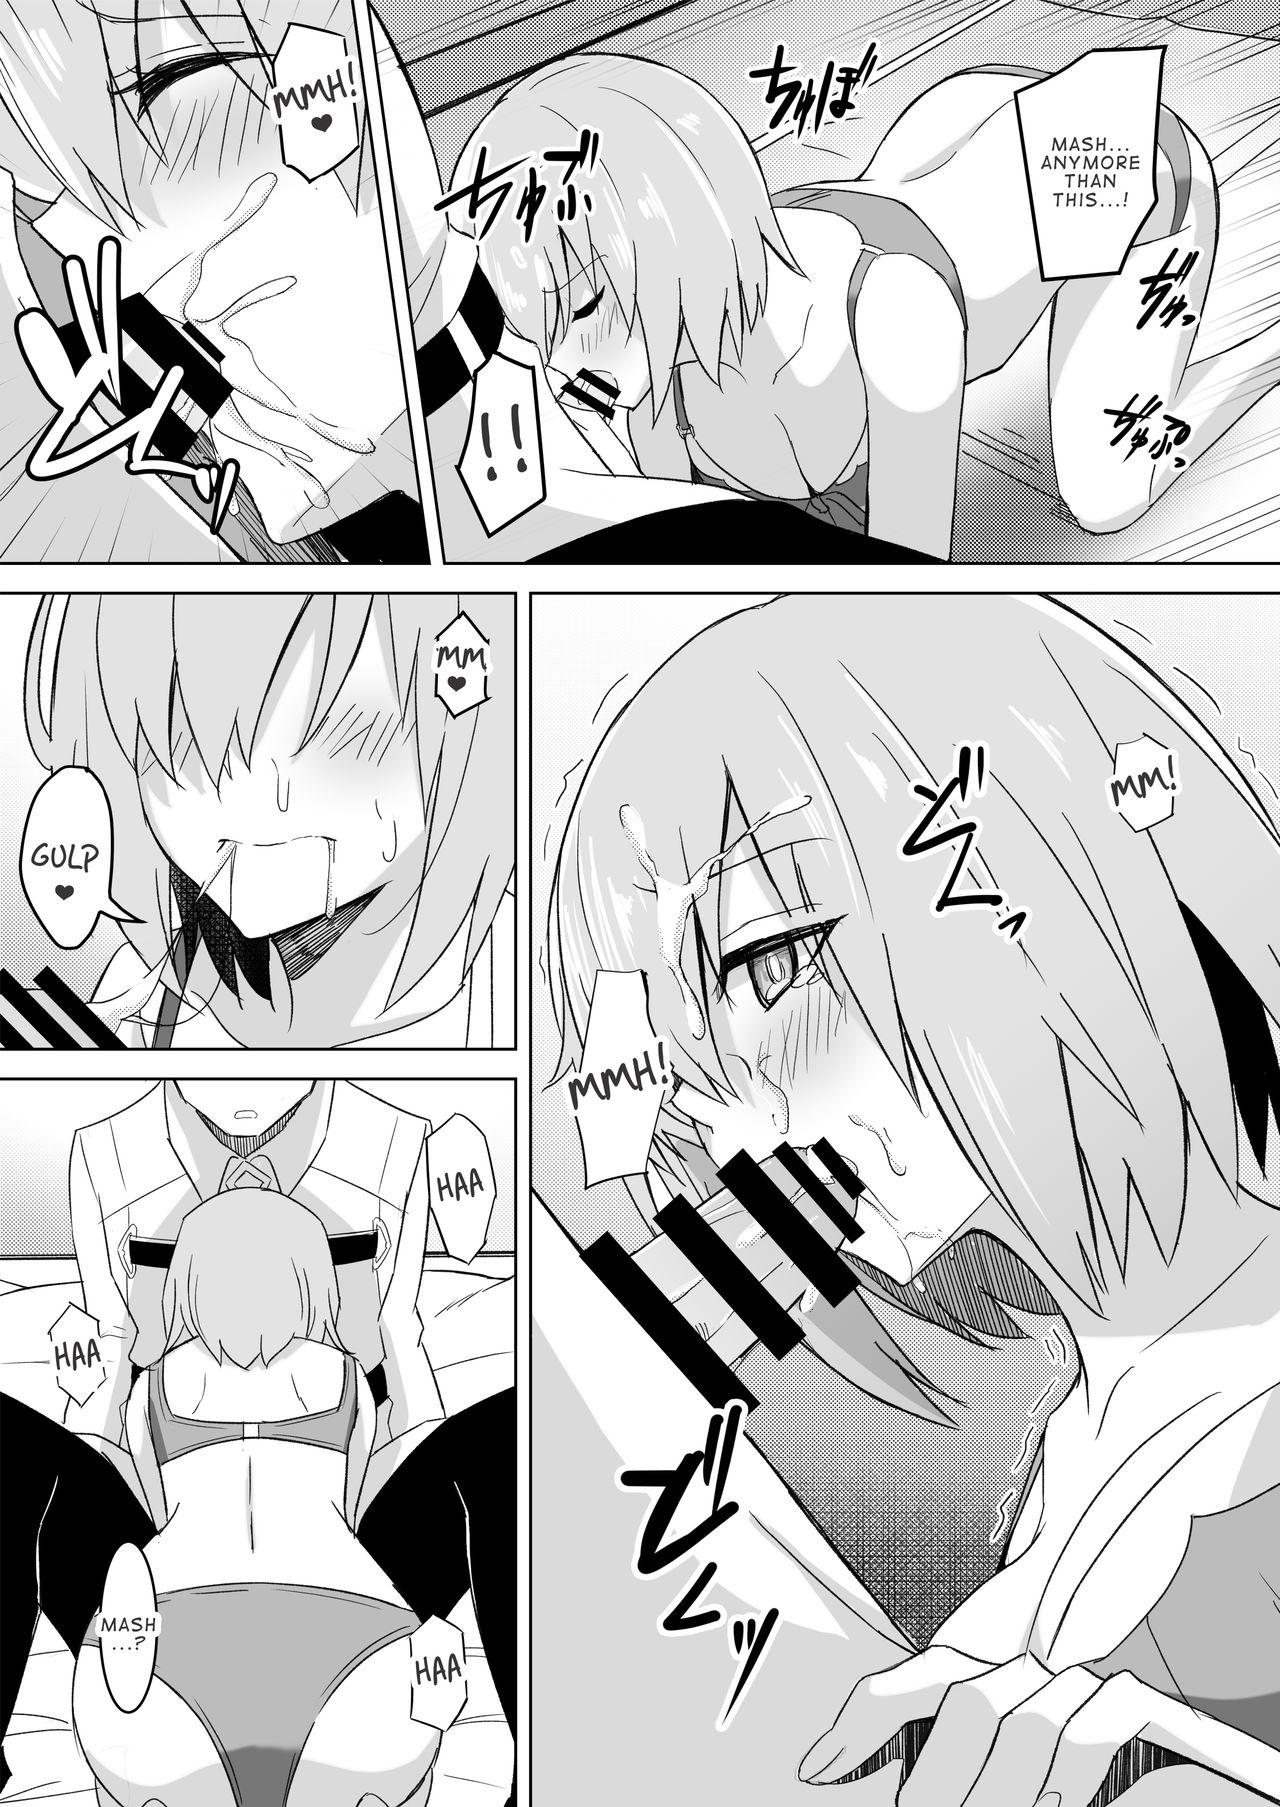 For Mash Was Jealousy - Fate grand order Big Ass - Page 8